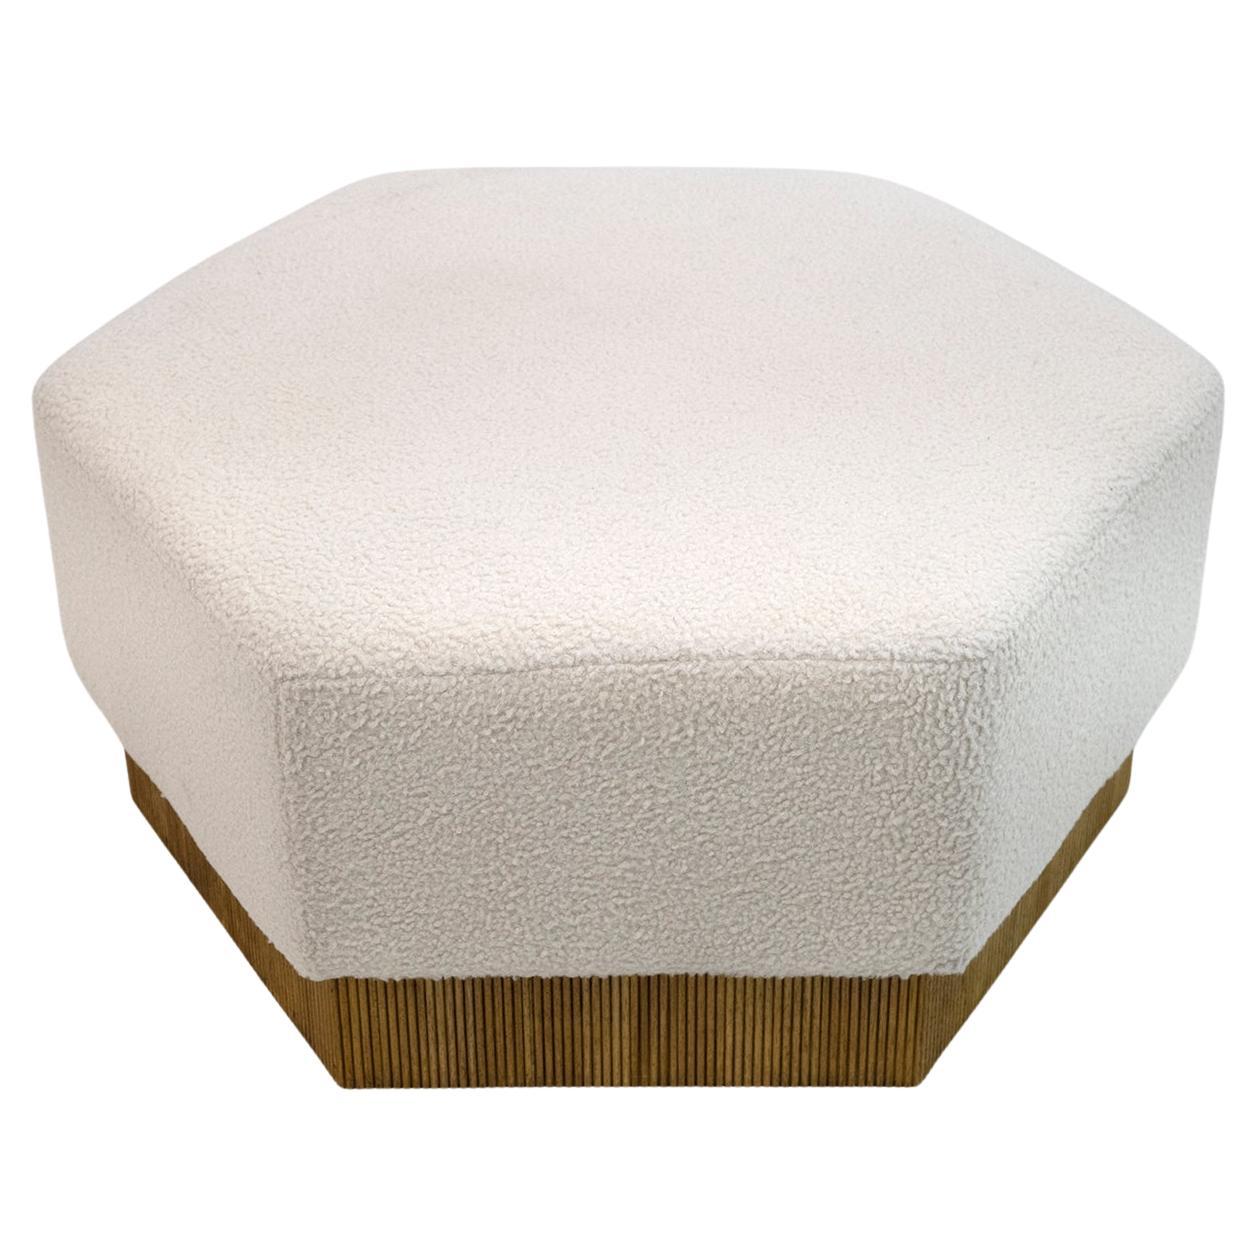 Hexagonal Pouf in Soft White Boucle with Wooden Base, Italy